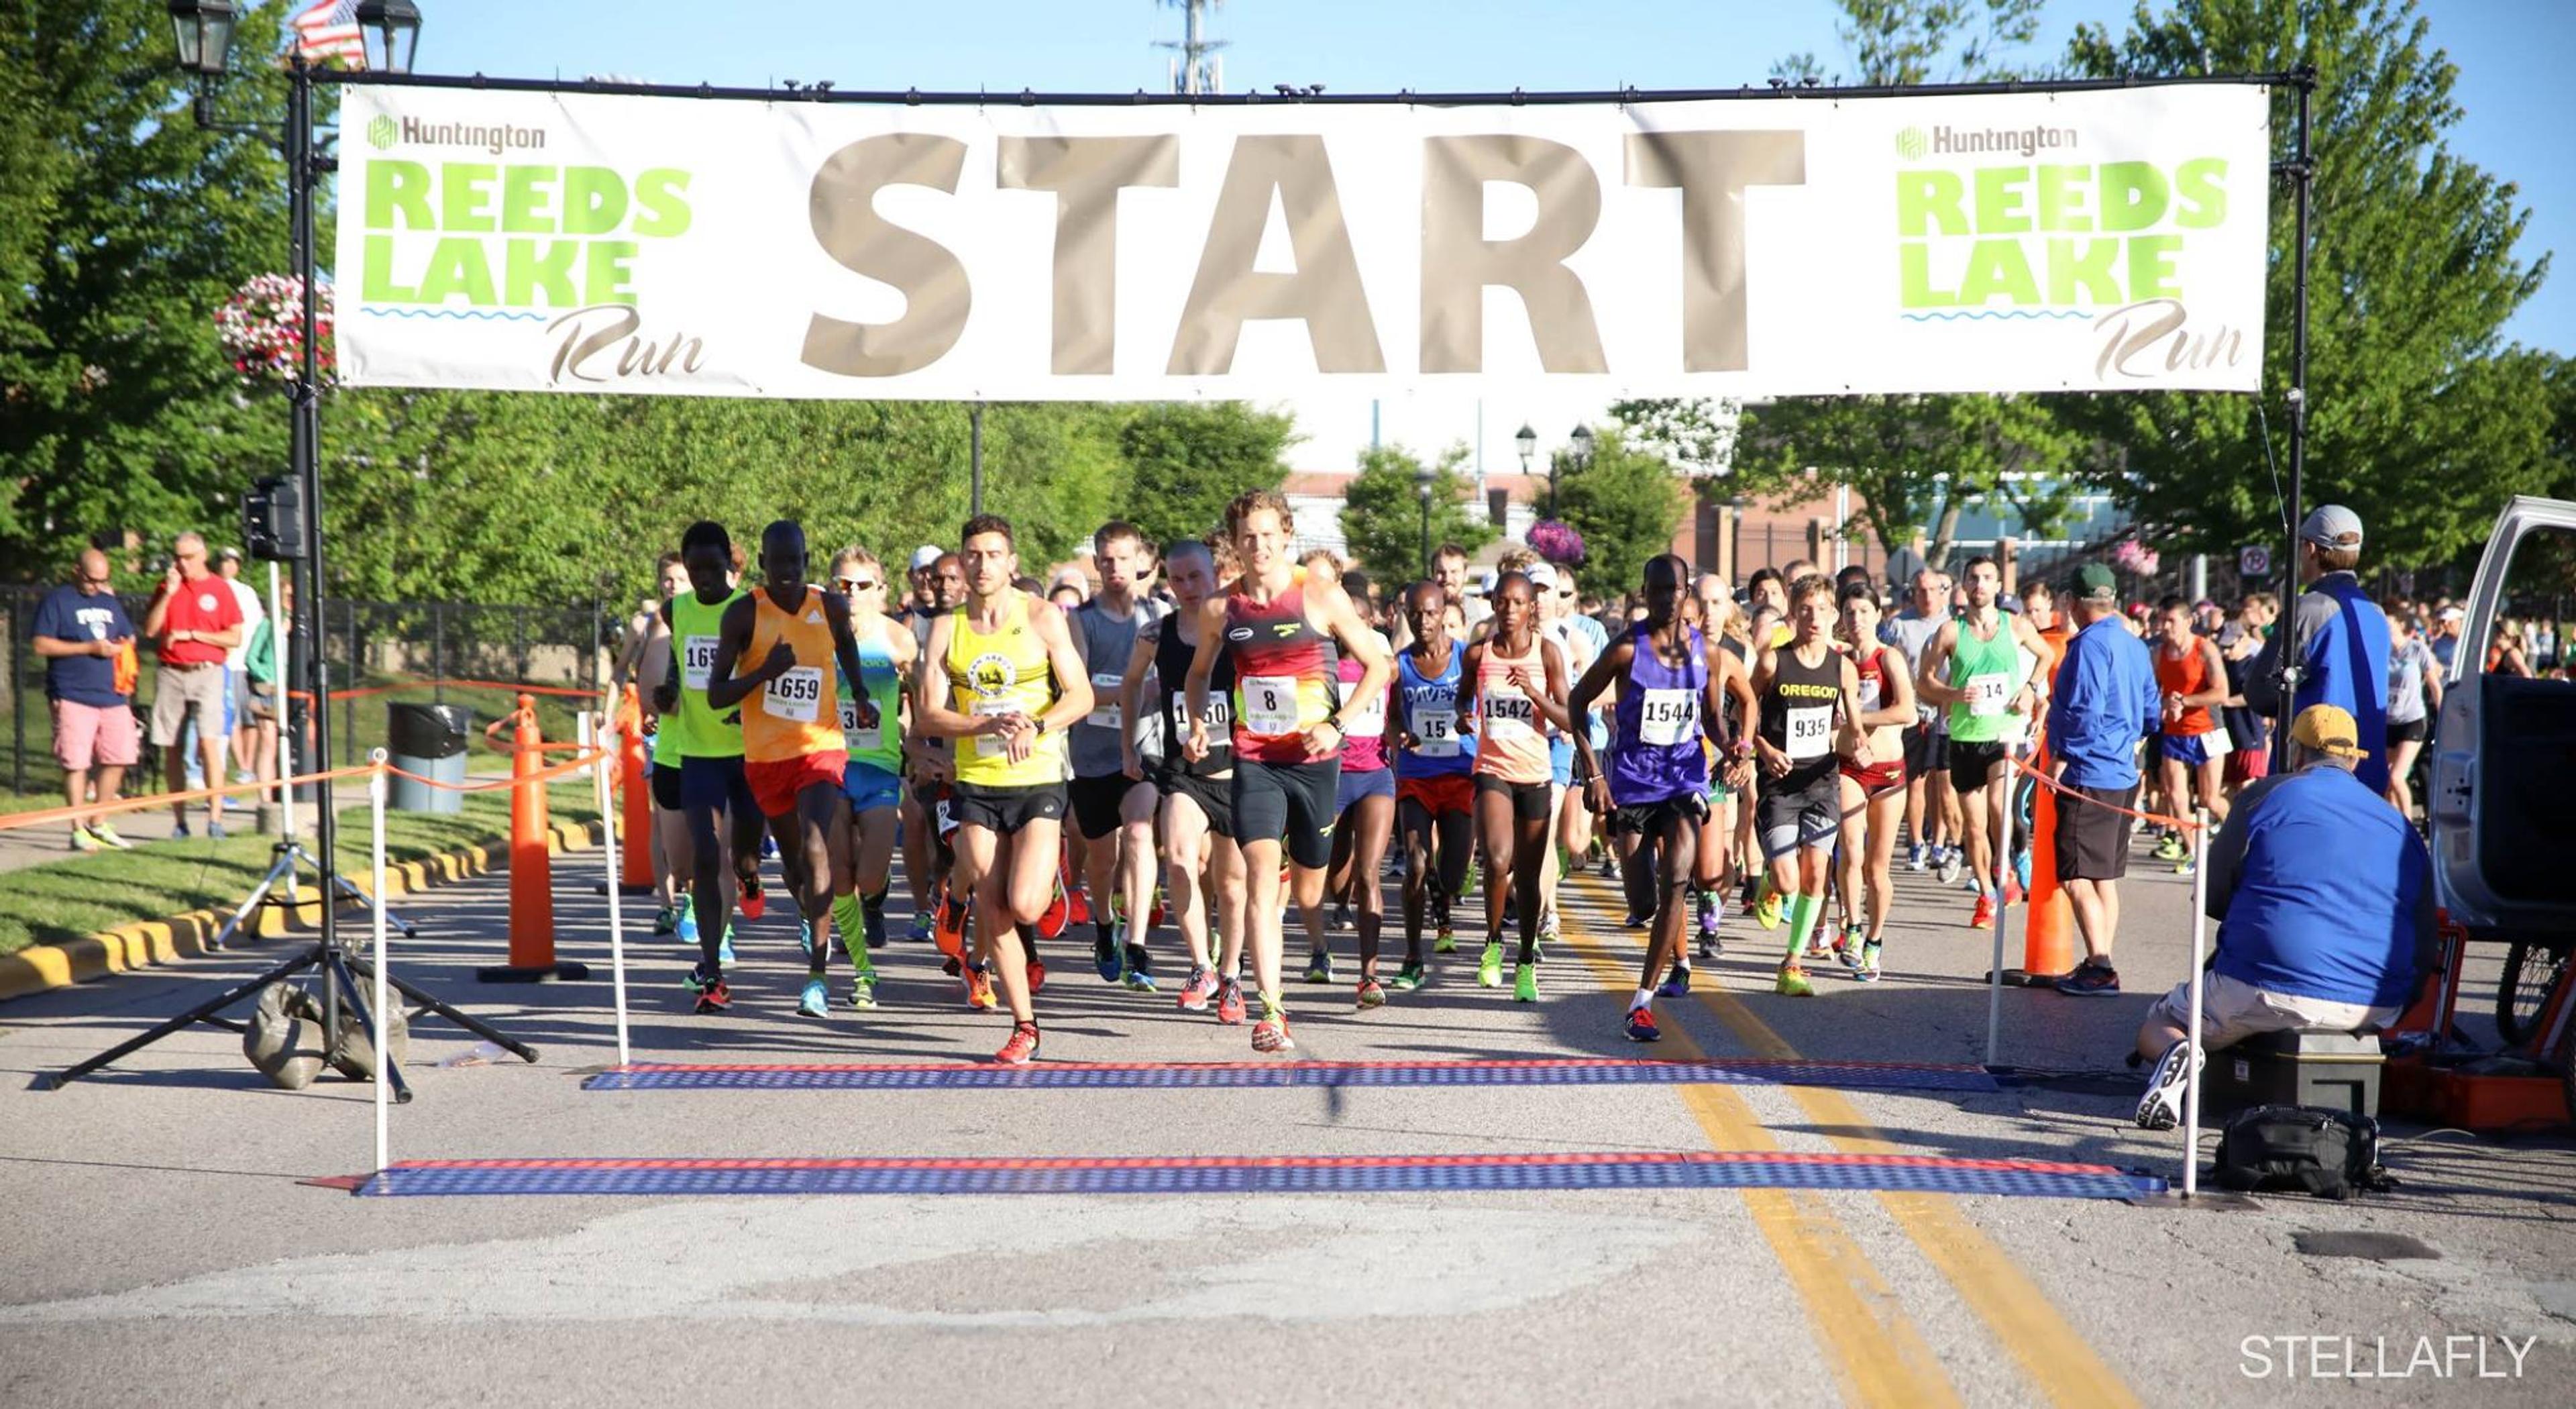 Image of the 2017 starting line of the Reed's Lake Run.